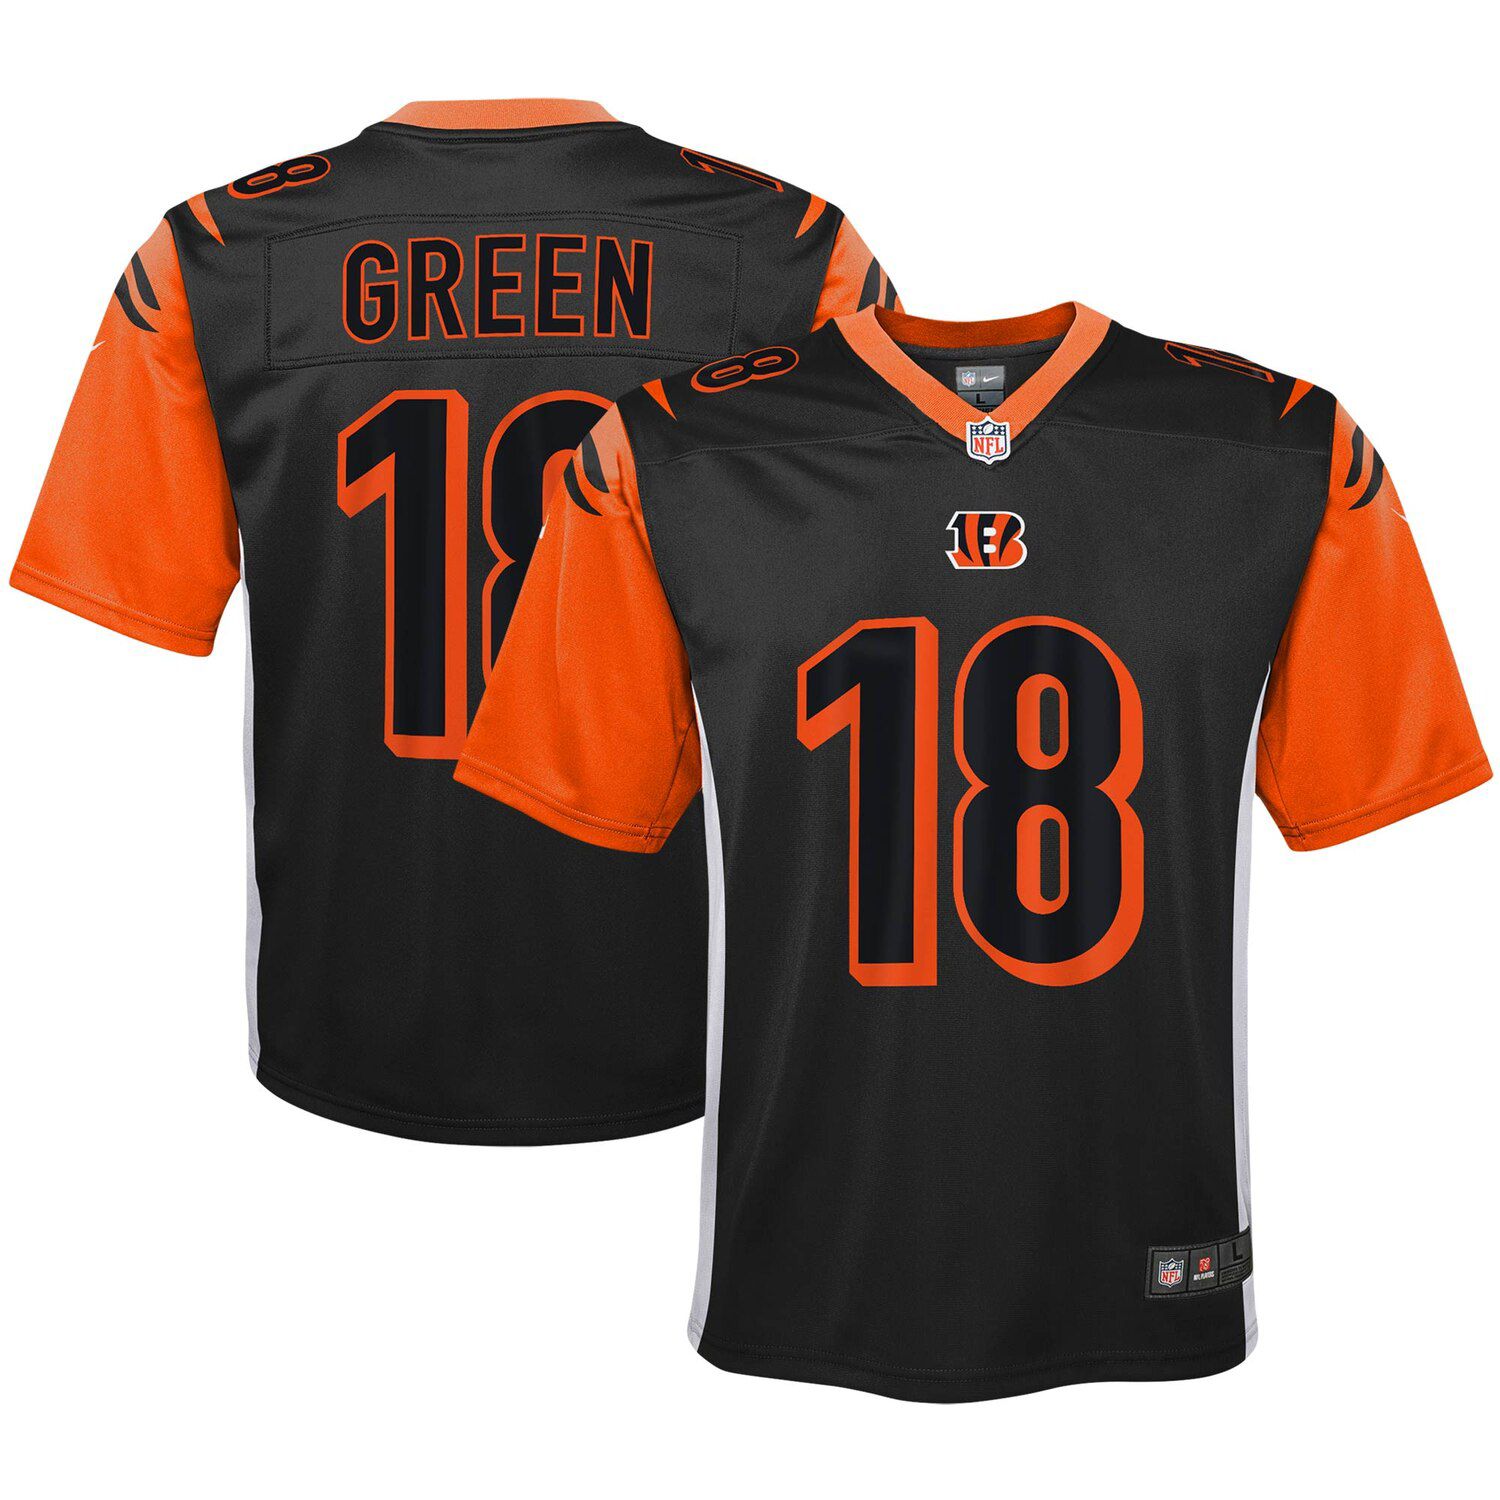 aj green youth bengals jersey